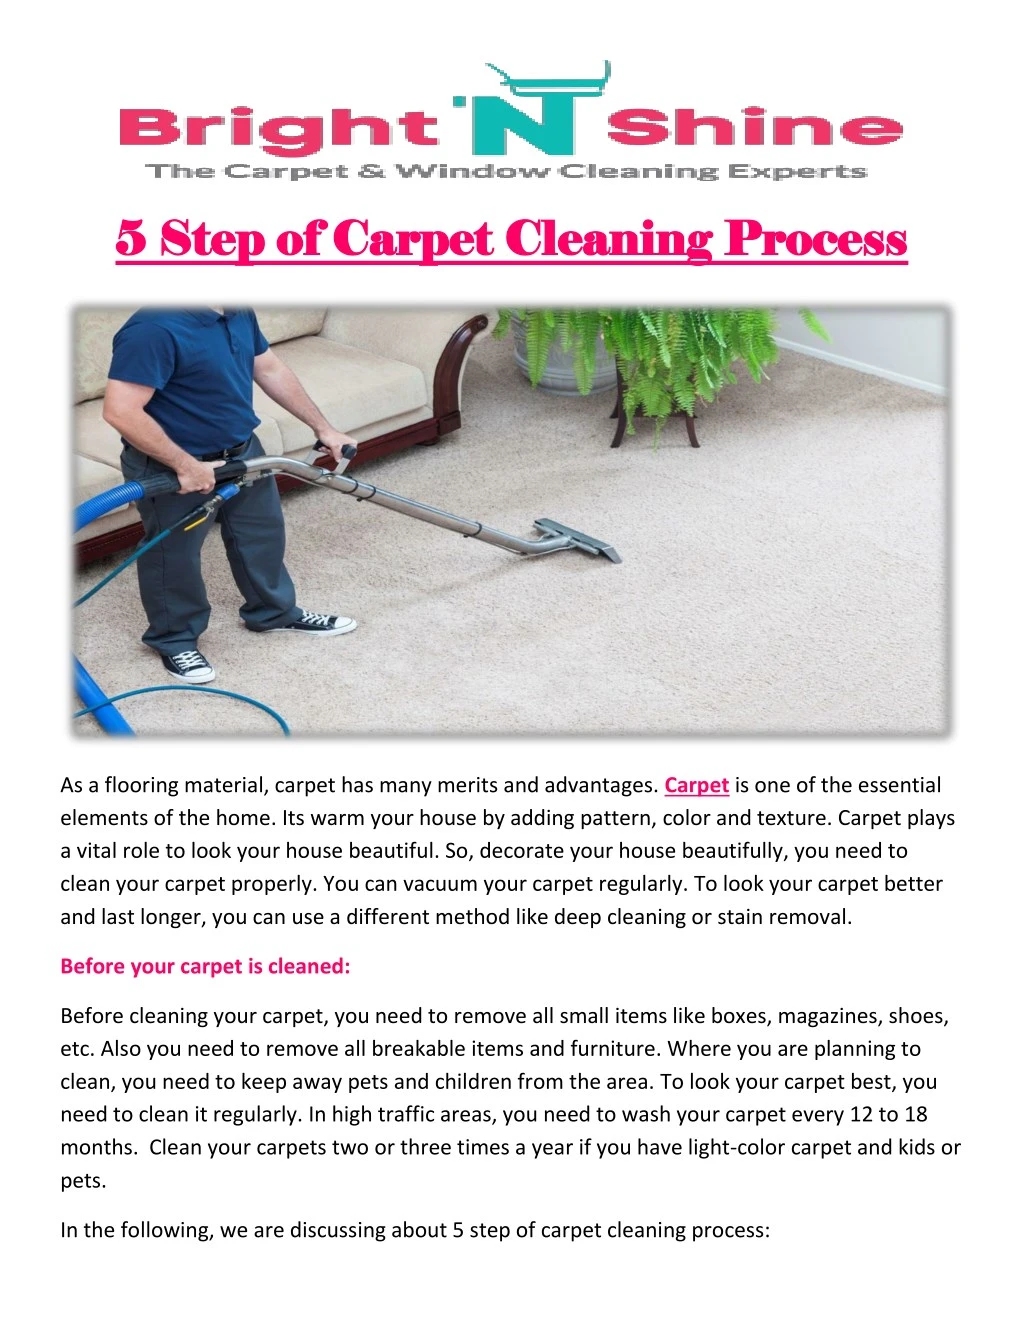 5 5 step of carpet cleaning process step